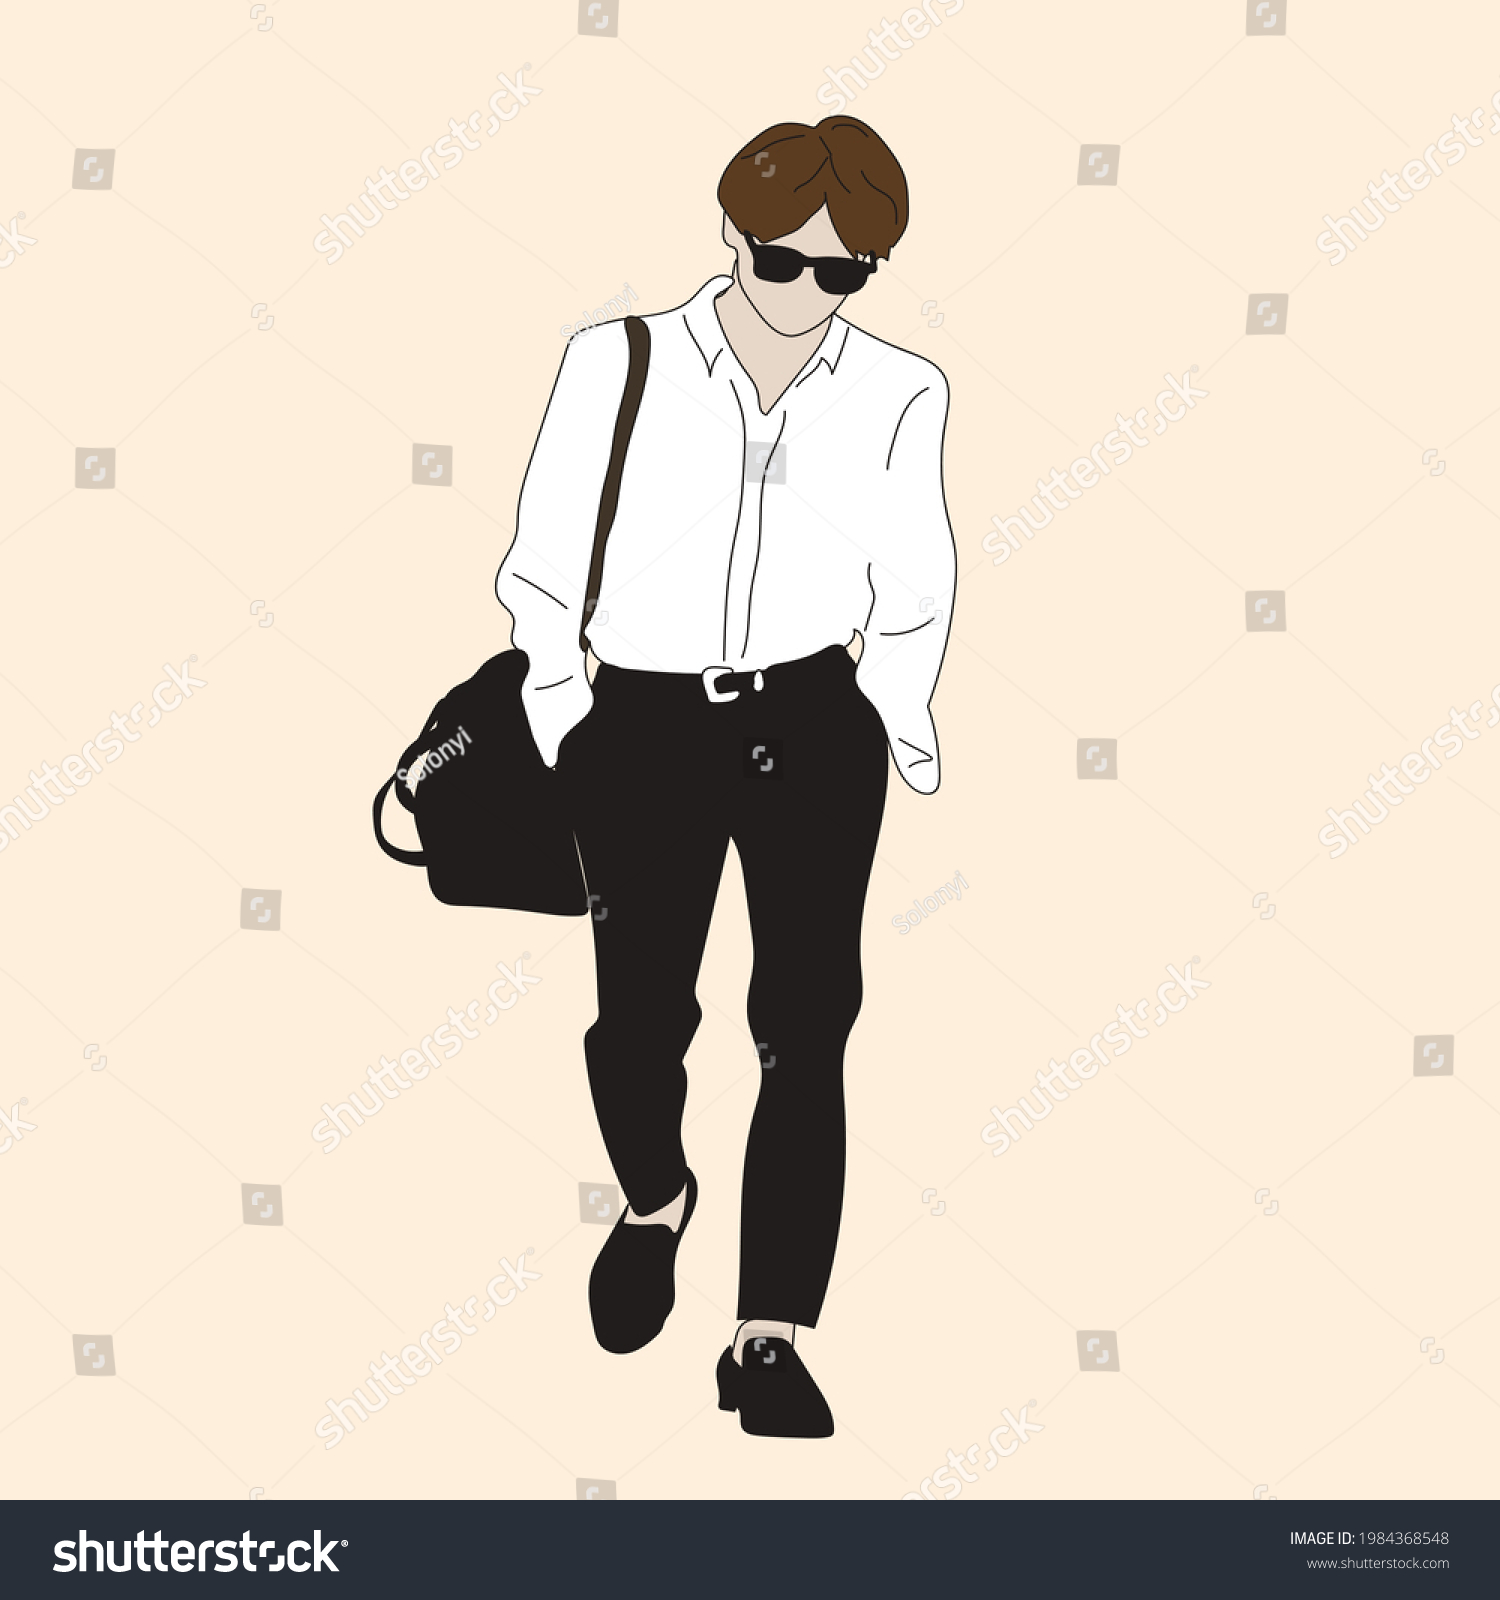 SVG of Vector illustration of Kpop street fashion. Street idols of Koreans. Kpop men's fashion idol. A guy in black pants and a white shirt. svg